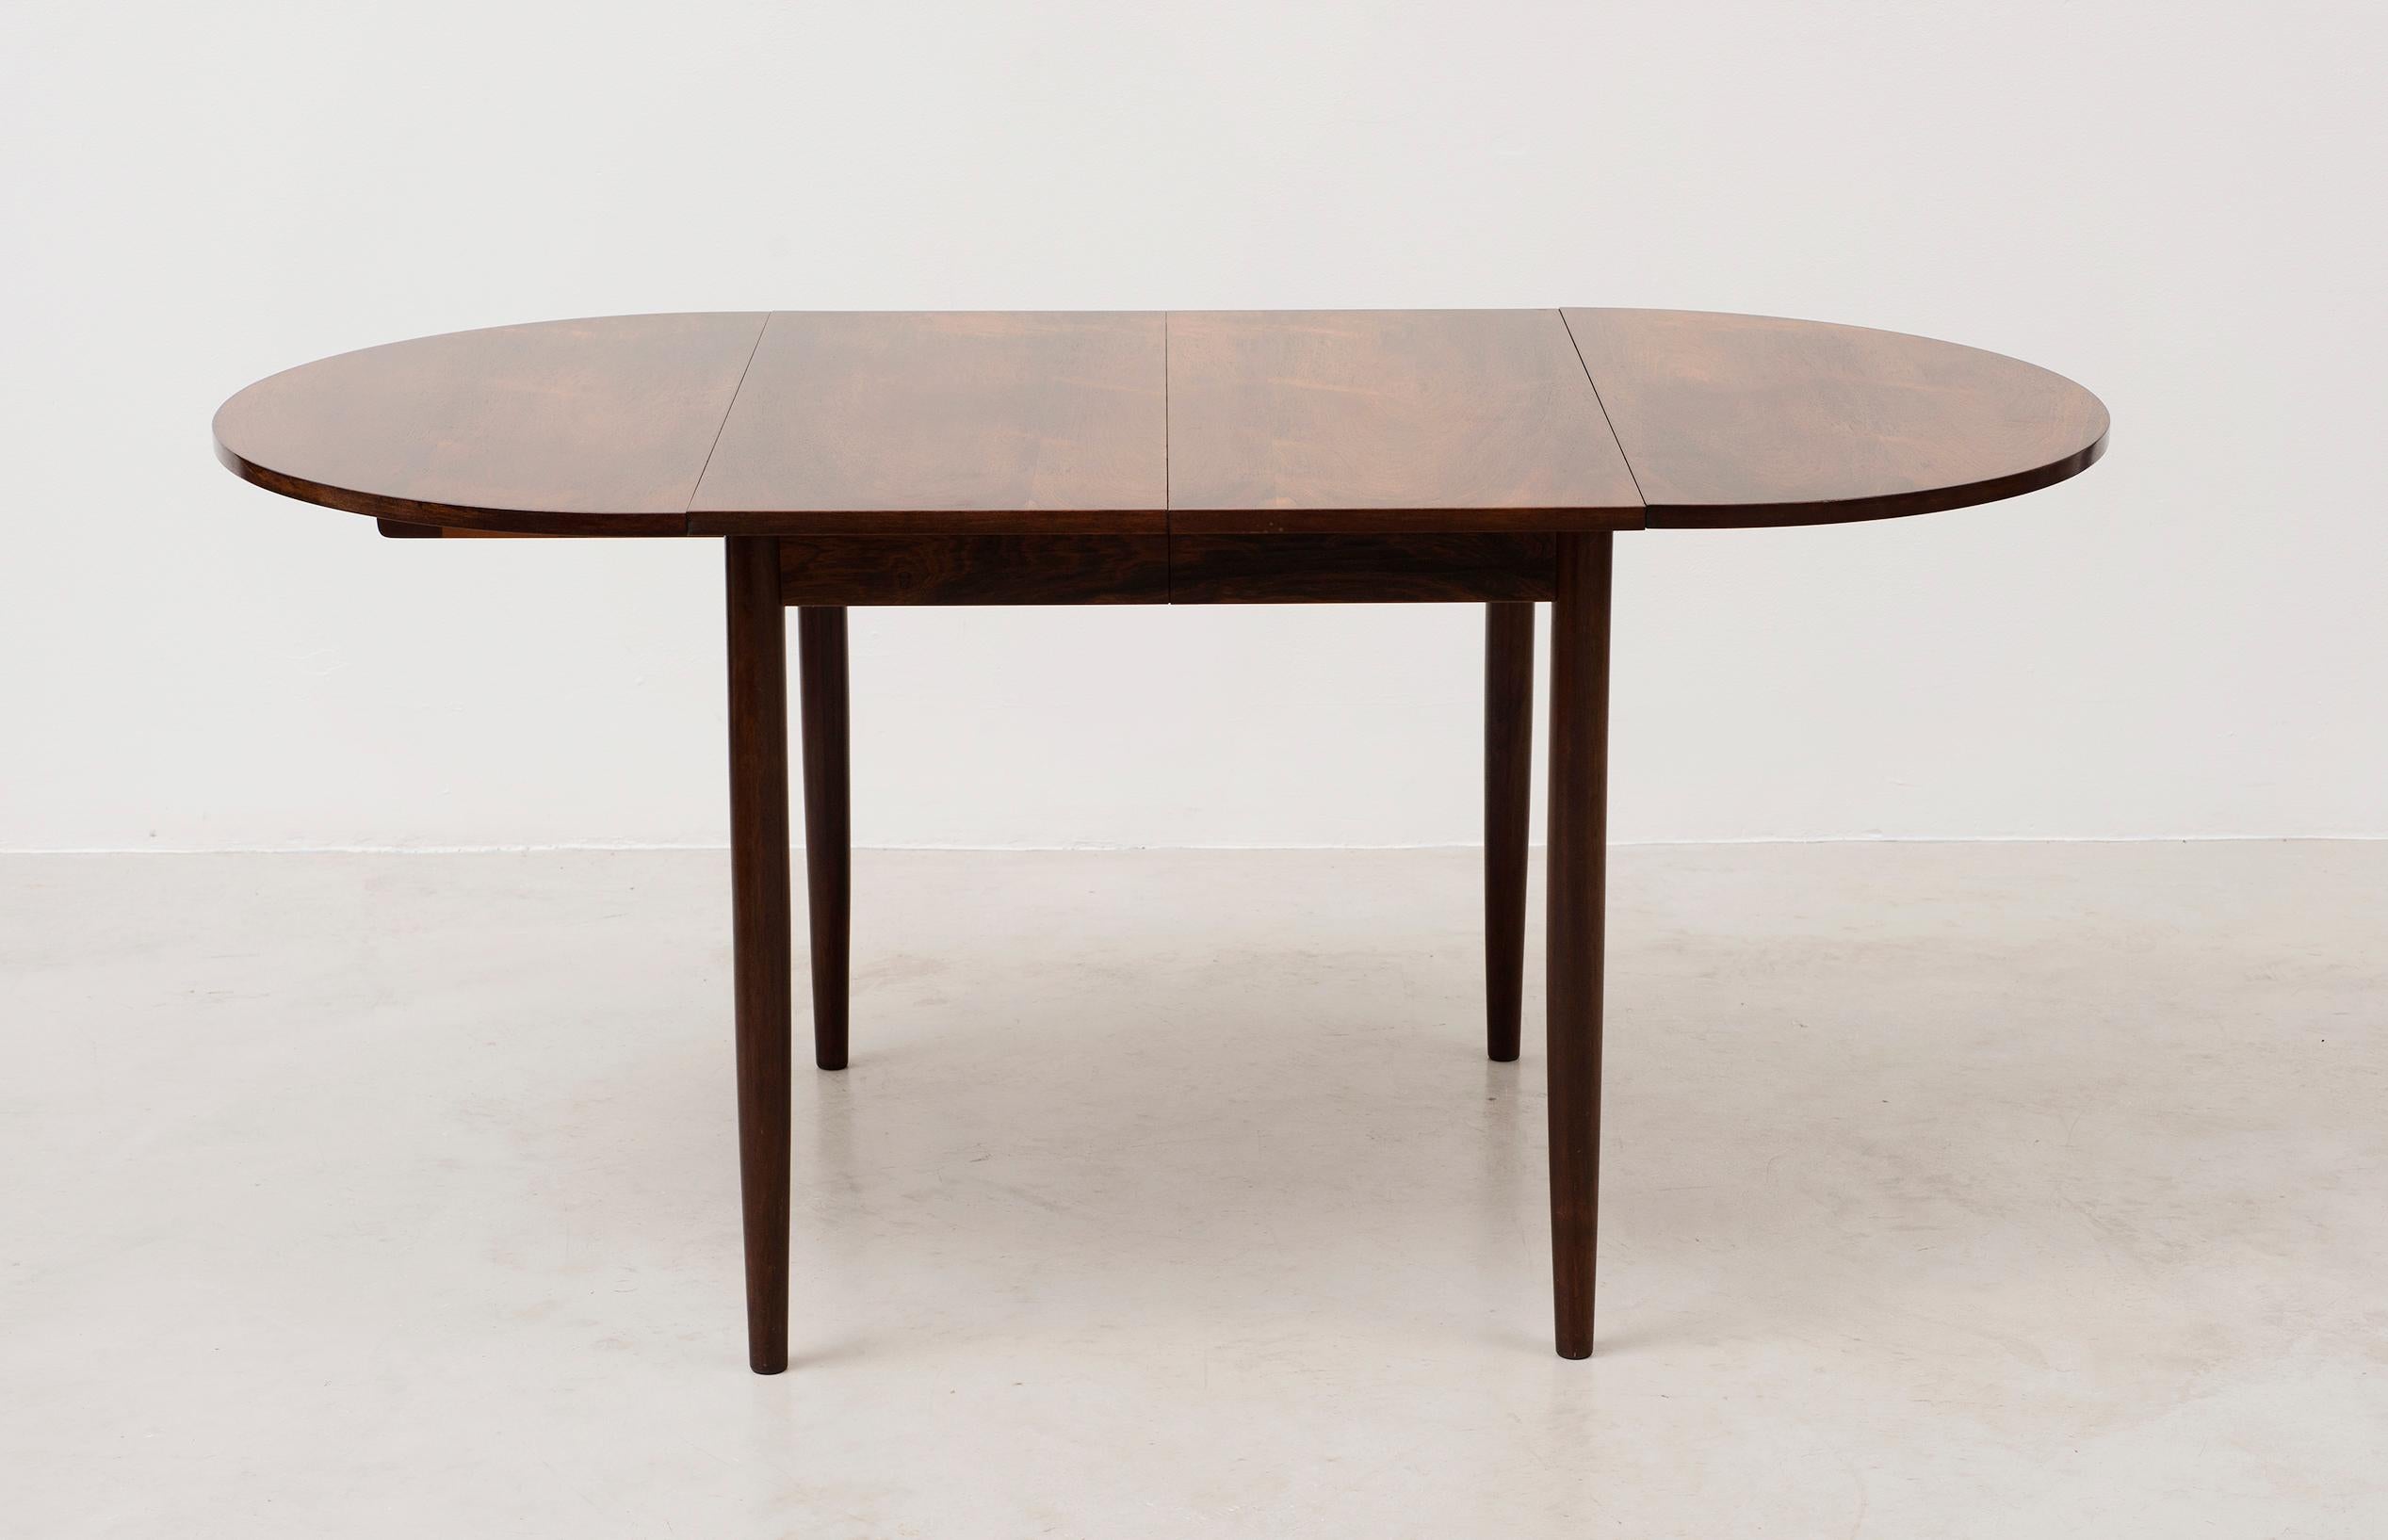 Elegant drop-leaf dining table in rosewood designed by Niels Moller. Drop leaves can be removed and two extra leaves exist for flexible configuration. Produced by JL Moller Mobelfabrik, Denmark, 1950s.

Dining table extends to a maximum width of 101